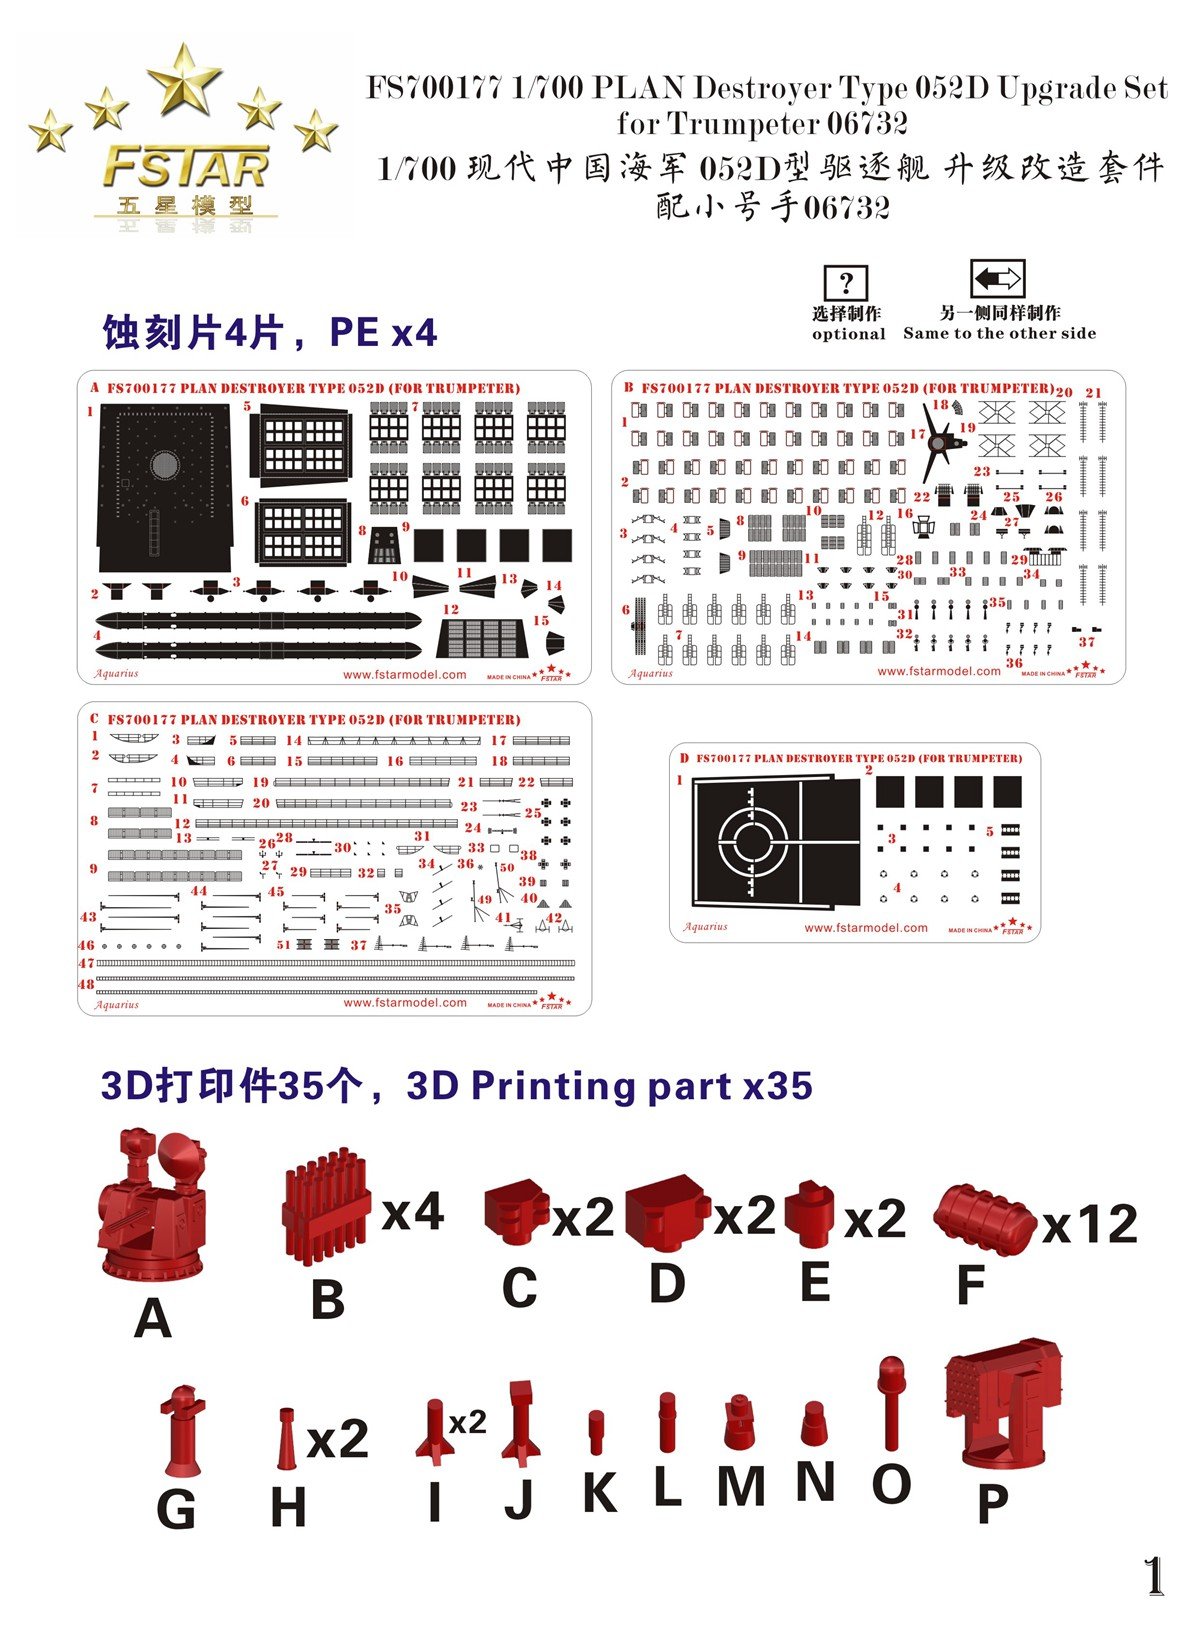 1/700 PLA Type 052D Destroyer Upgrade Set for Trumpeter 06732 - Click Image to Close